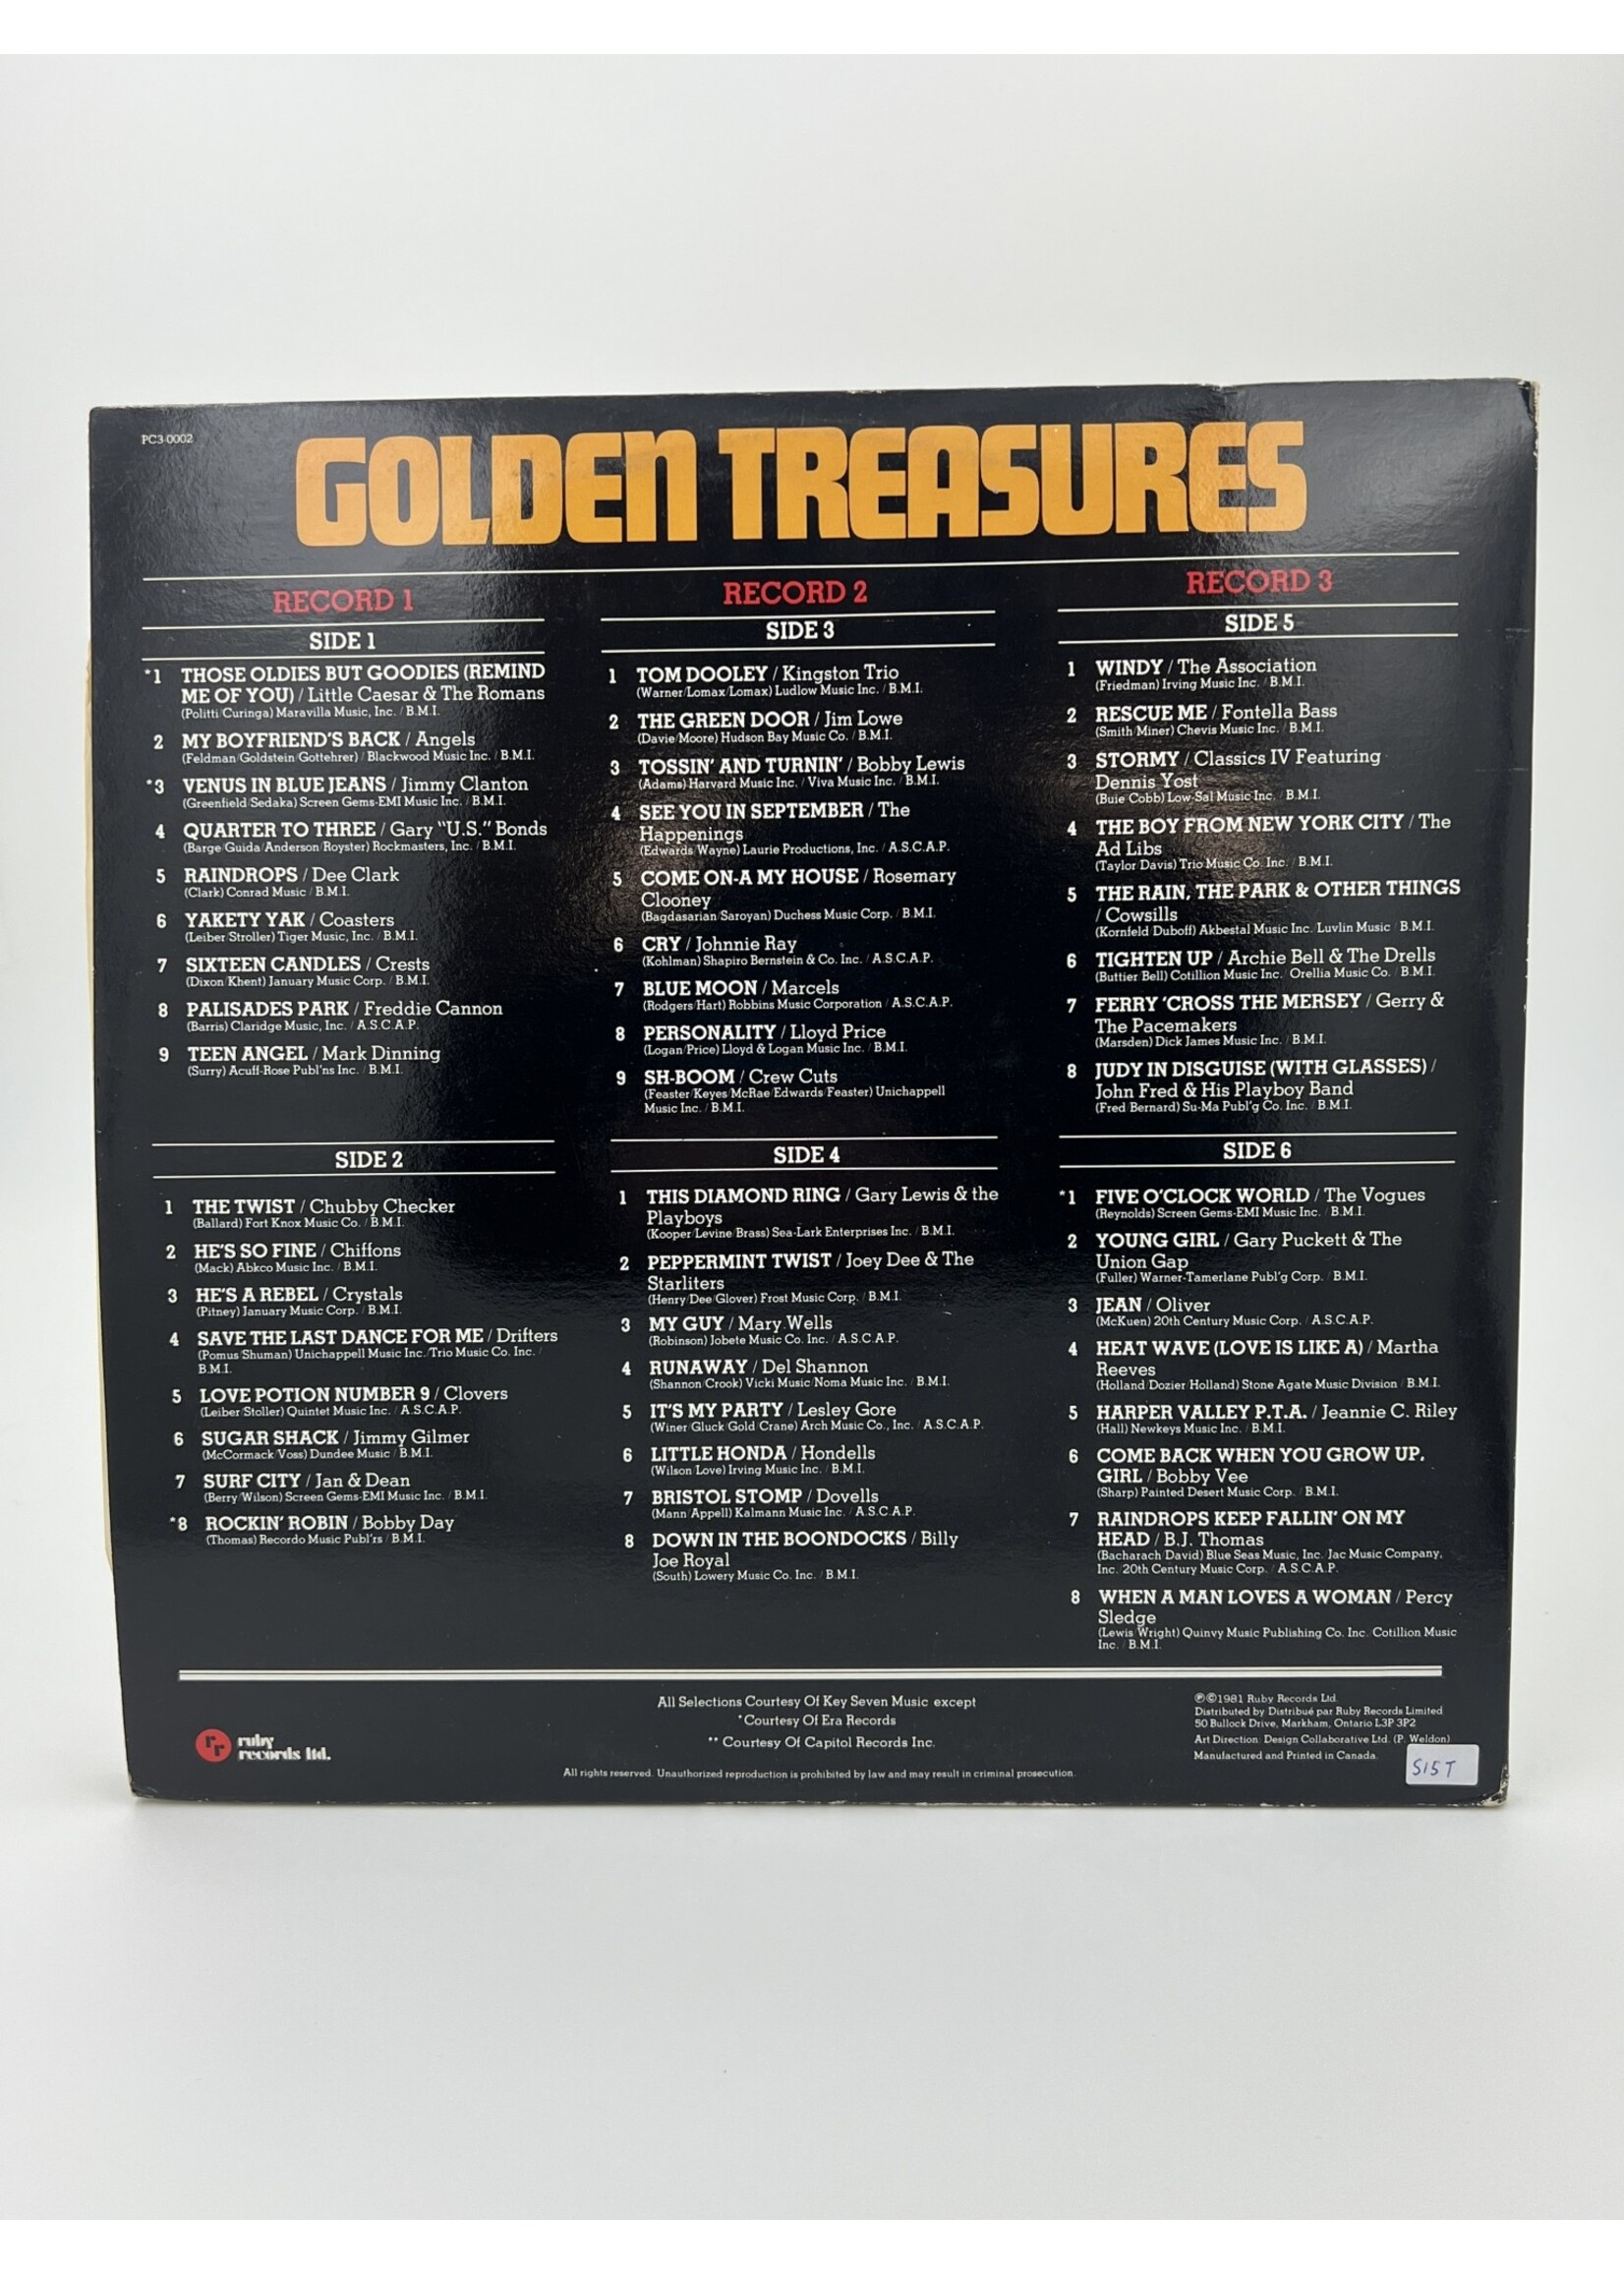 LP   Golden Treasures Special Edition 50 Hits By Original Artists 3 LP Record